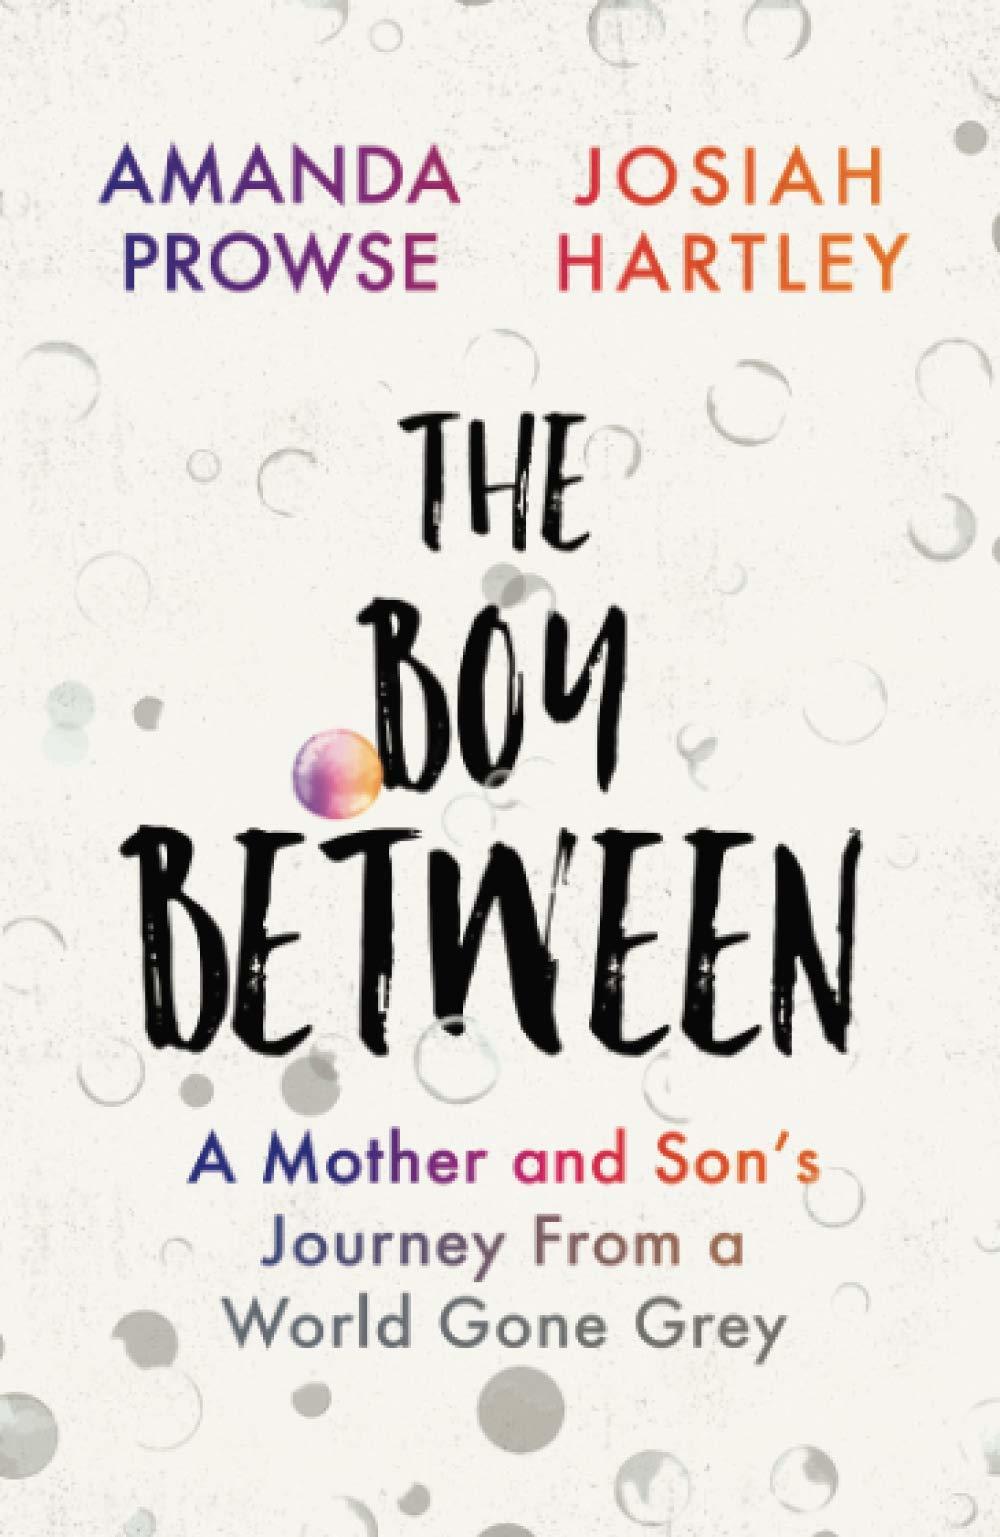 The Boy Between by Amanda Prowse and Josiah Hartley.